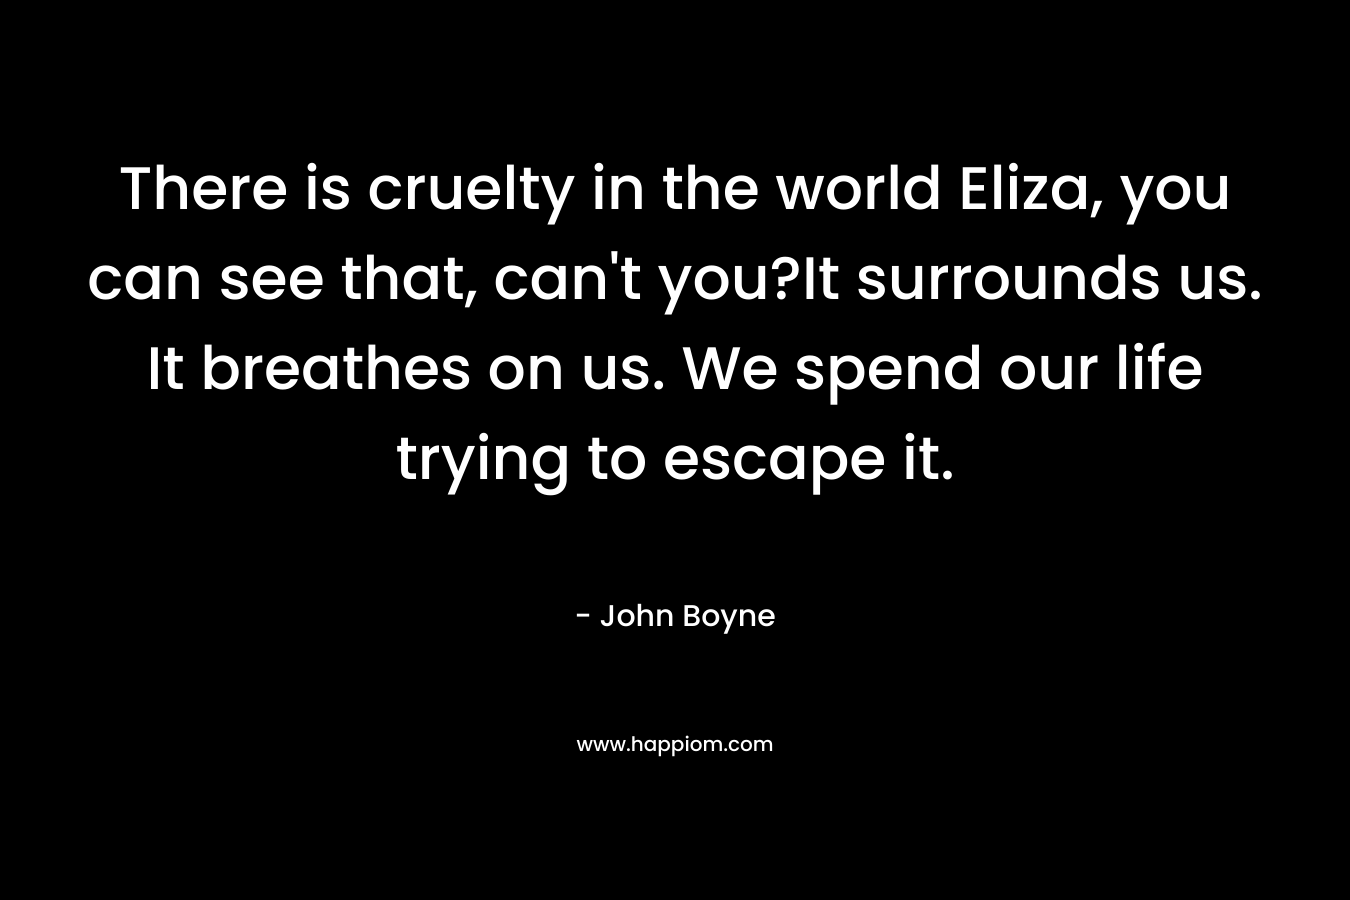 There is cruelty in the world Eliza, you can see that, can’t you?It surrounds us. It breathes on us. We spend our life trying to escape it. – John Boyne